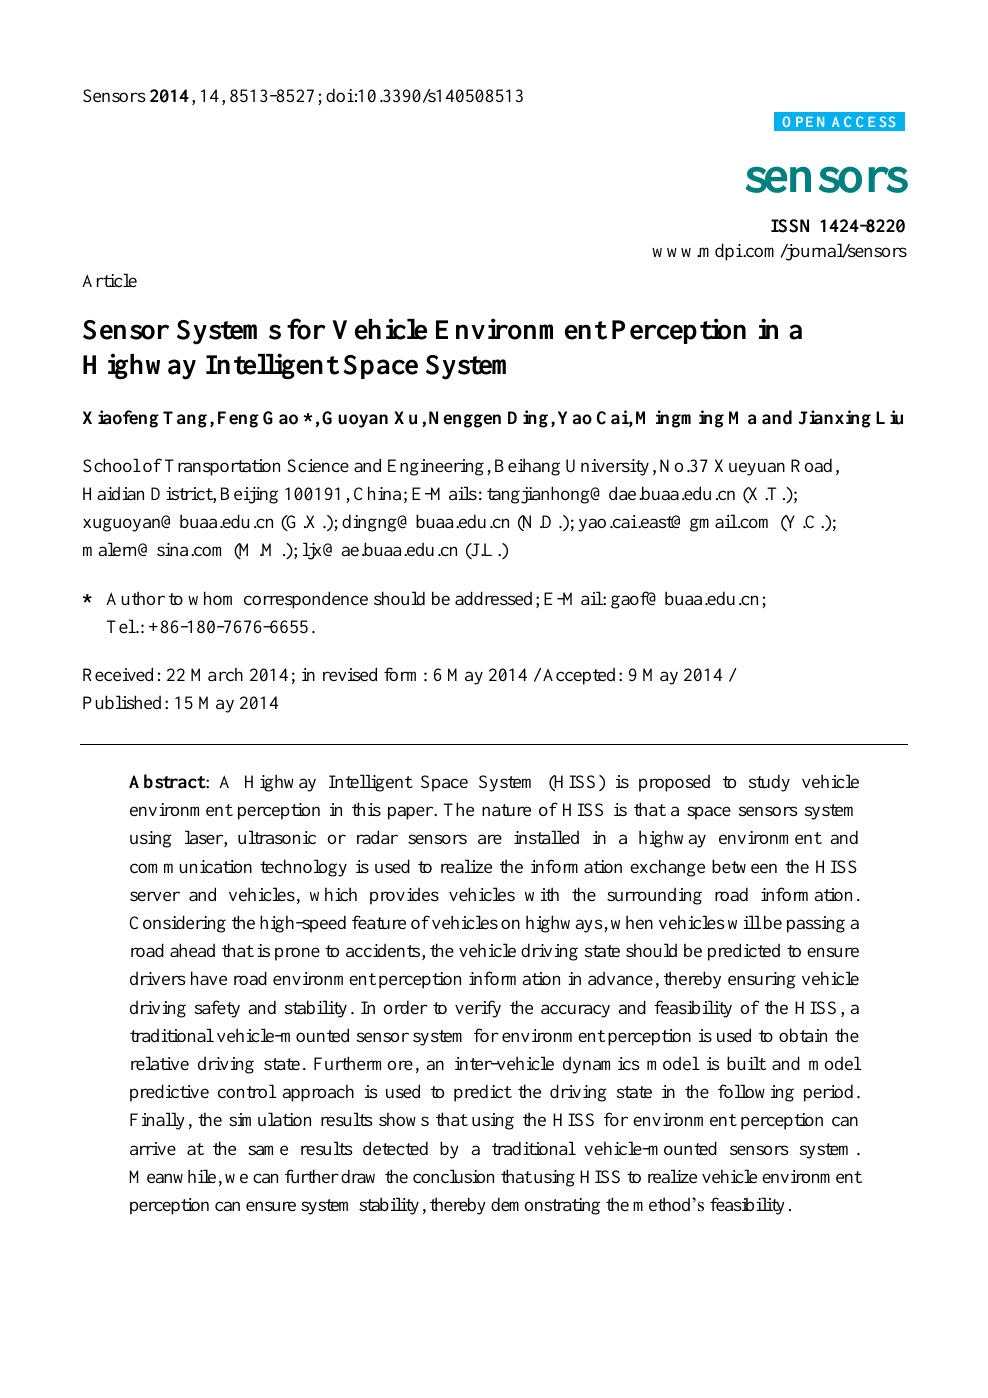 Sensor Systems For Vehicle Environment Perception In A Highway Intelligent Space System Topic Of Research Paper In Mechanical Engineering Download Scholarly Article Pdf And Read For Free On Cyberleninka Open Science